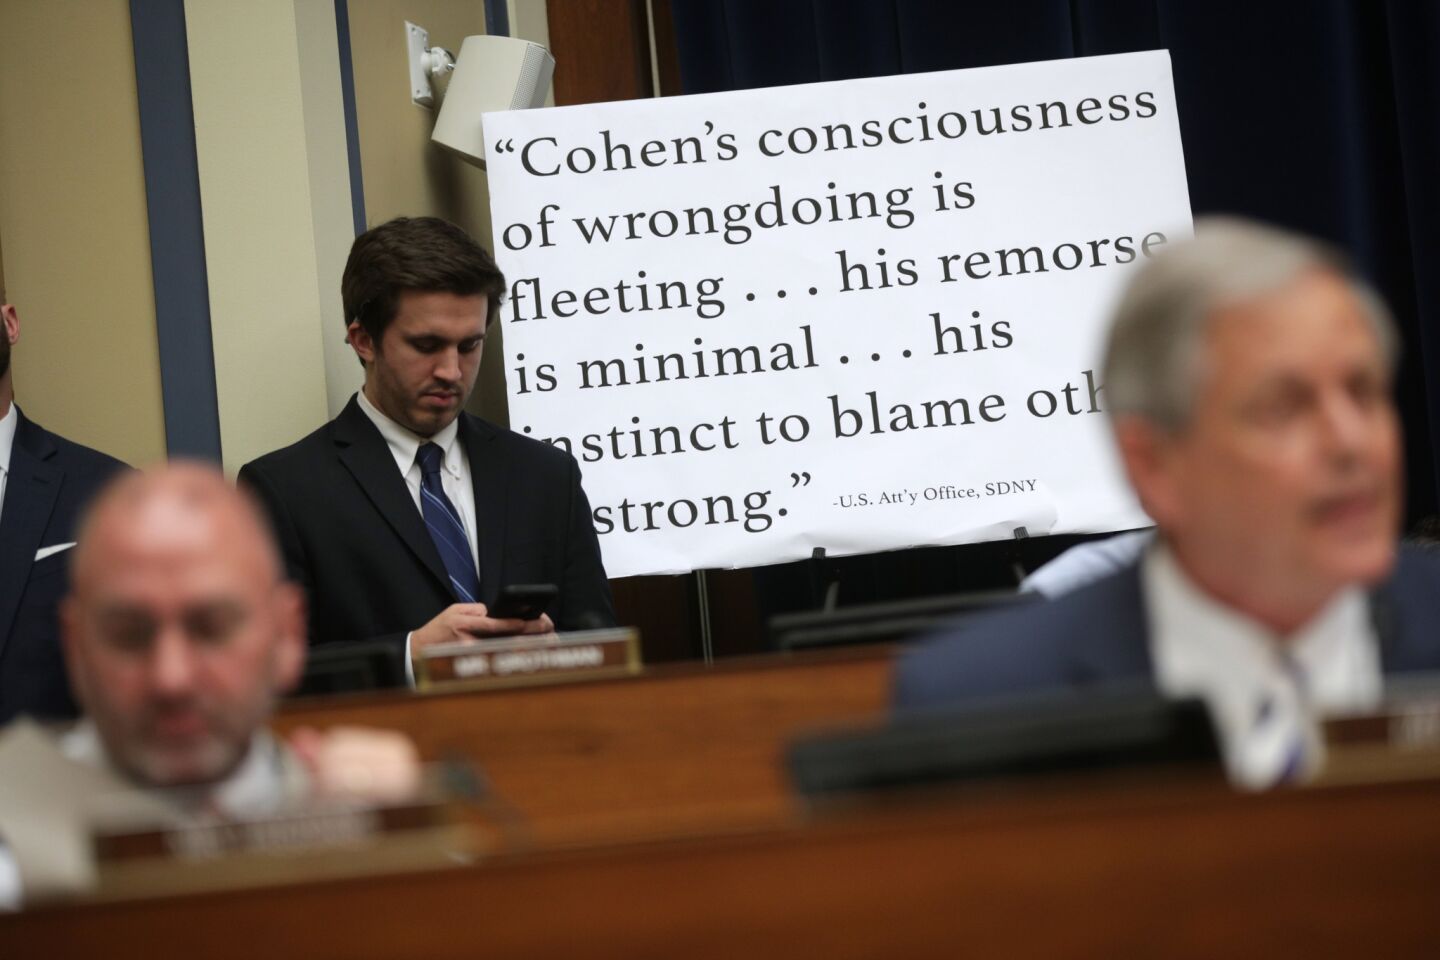 A quote about Michael Cohen, attributed to the U.S. Attorney's Office, is put on display during testimony before the House Oversight Committee on Capitol Hill February 27, 2019 in Washington, DC.